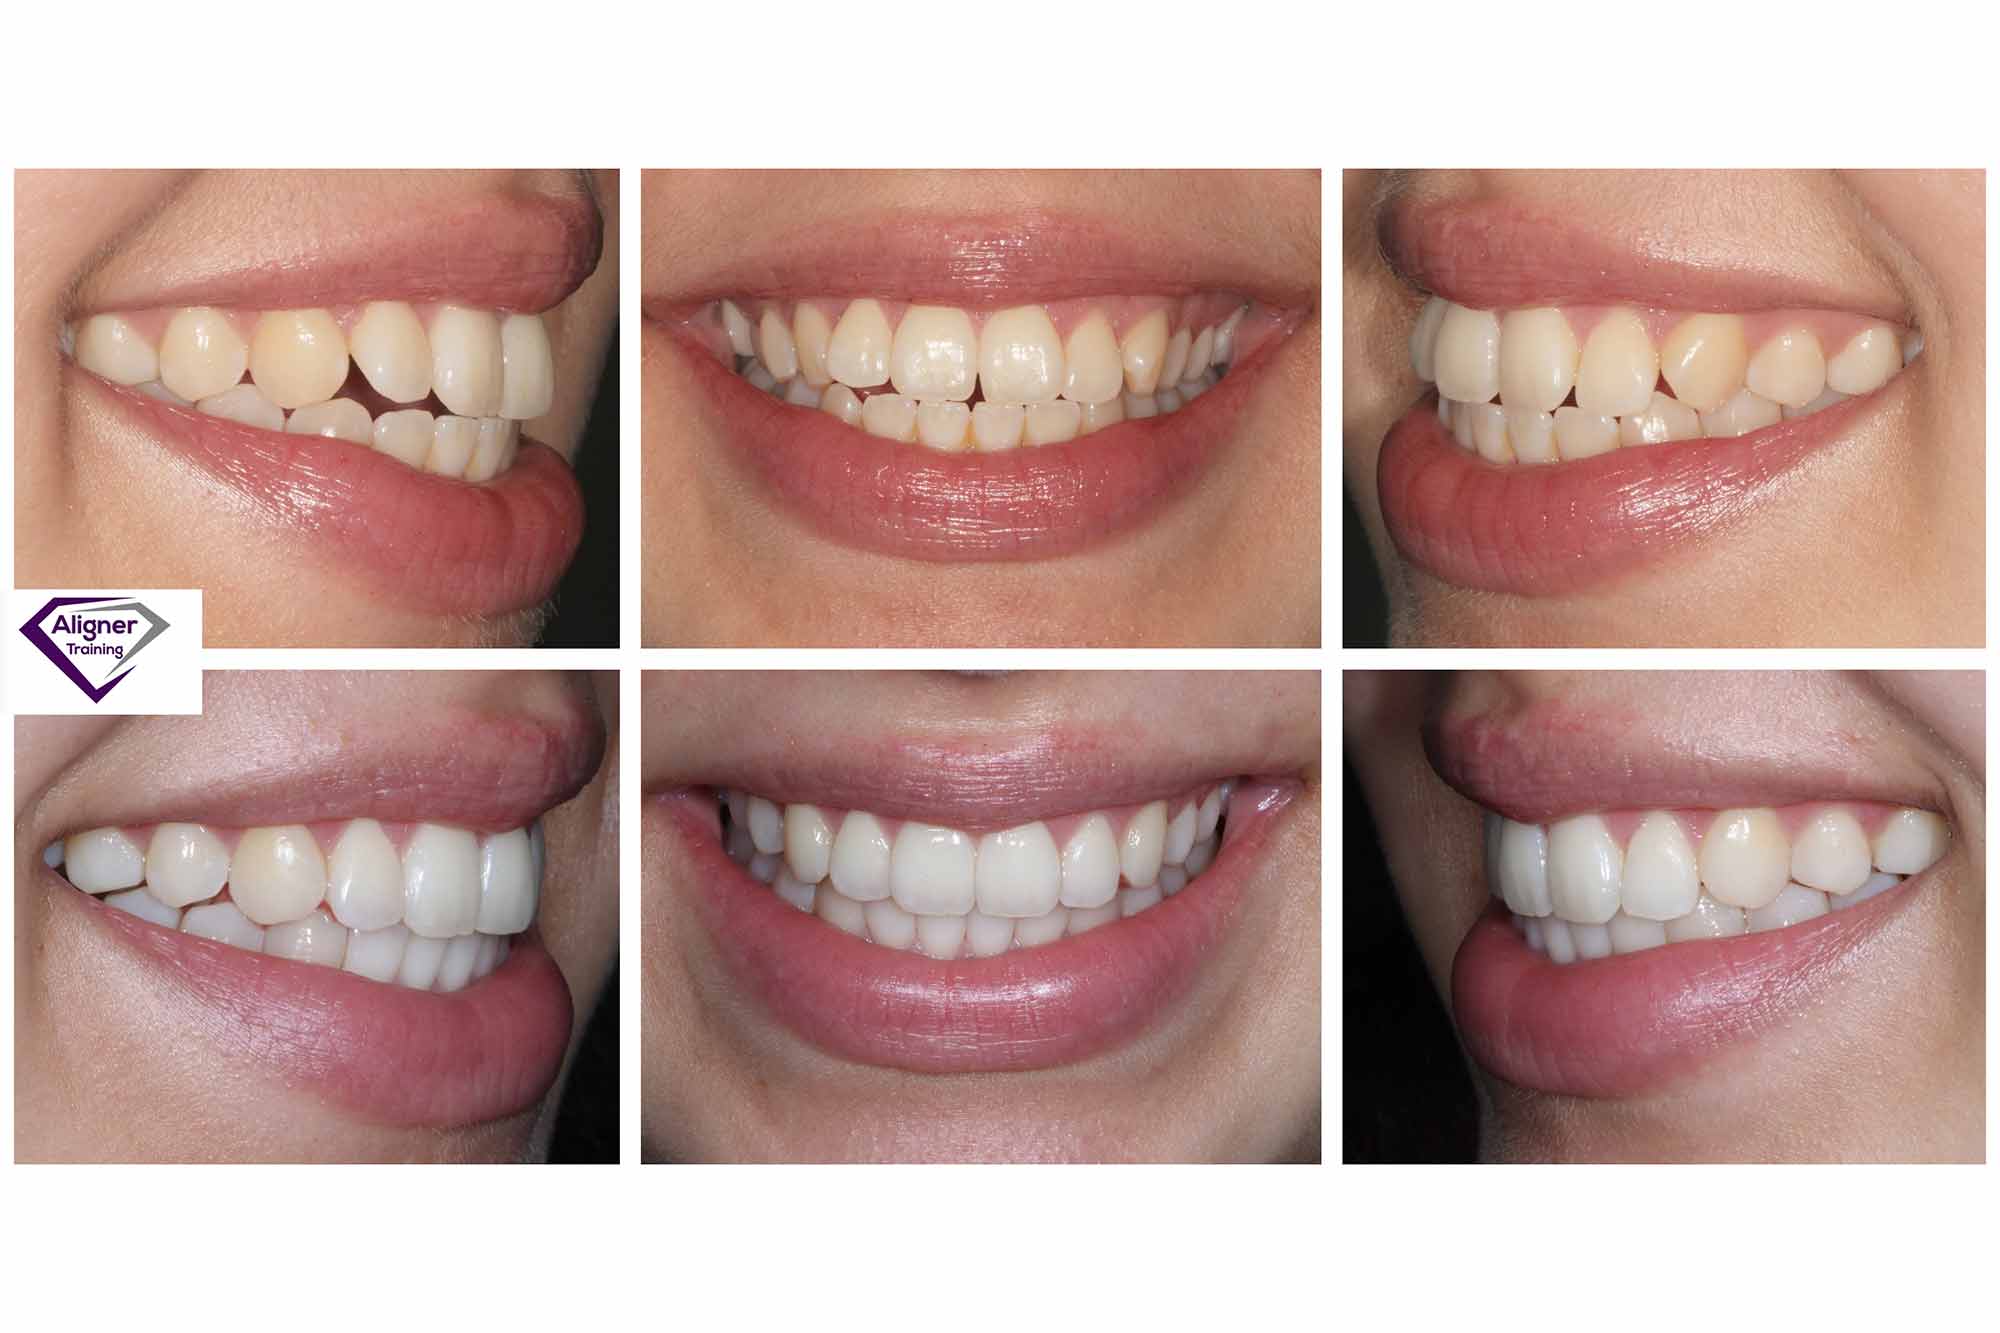 Clear aligner therapy with minimum maintenance